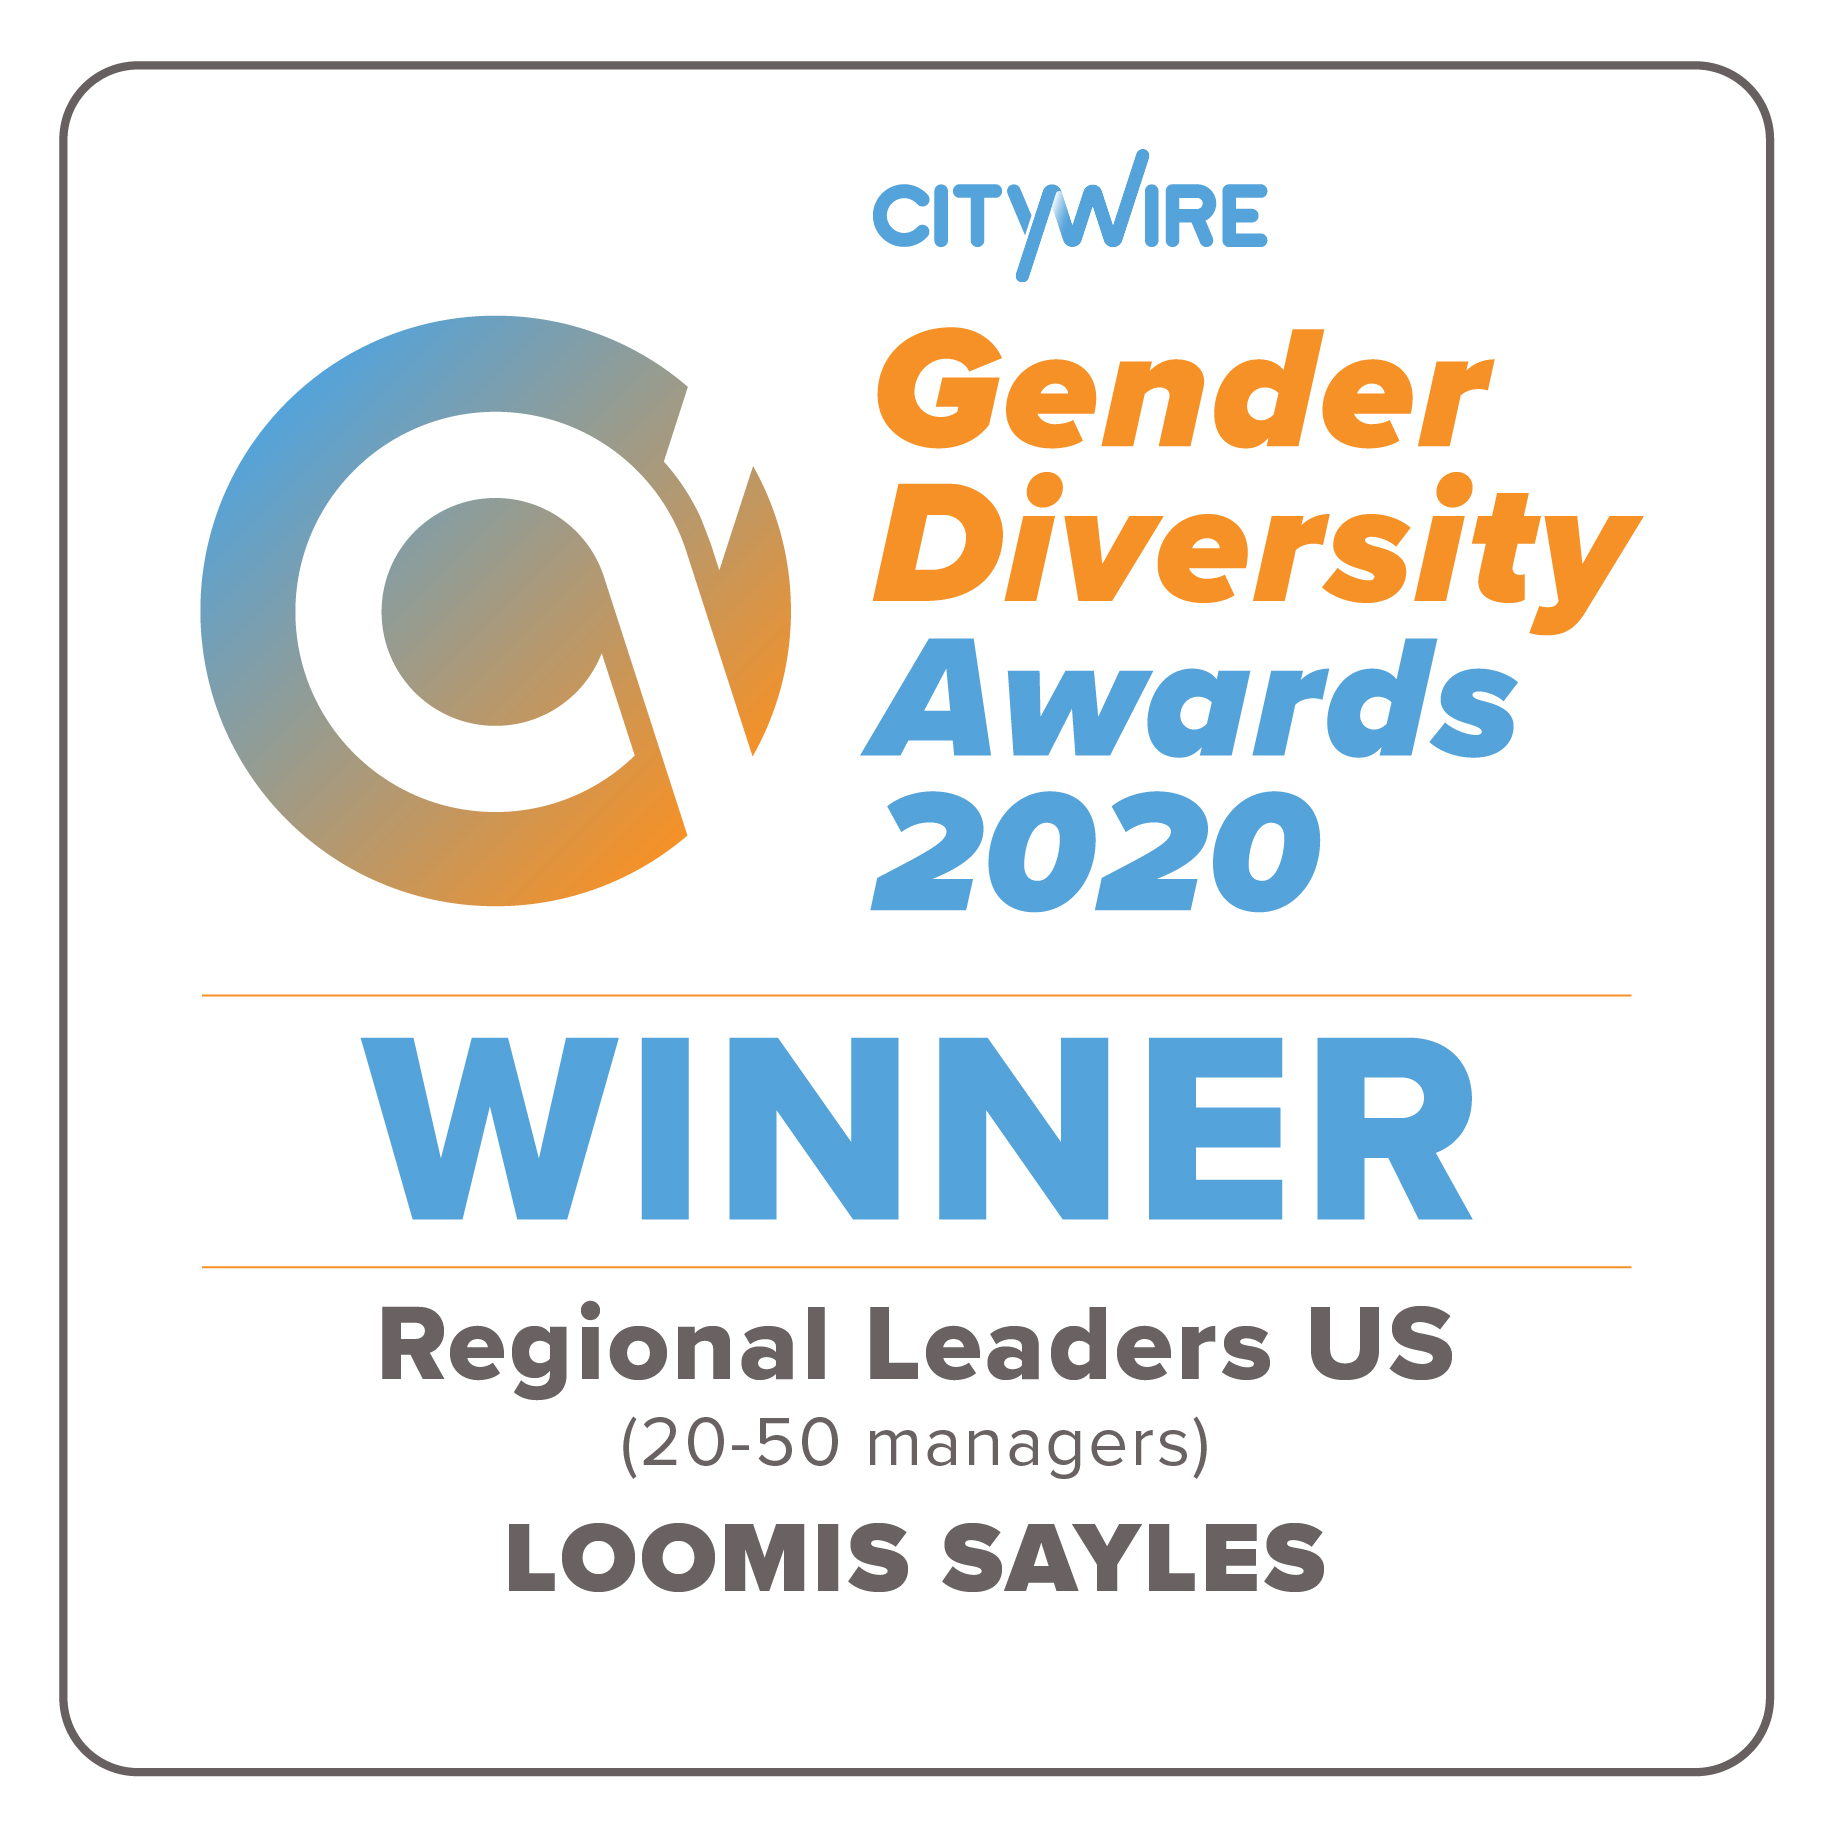 2020 Gender Diversity Award for regional leaders in the US (20-50 managers)